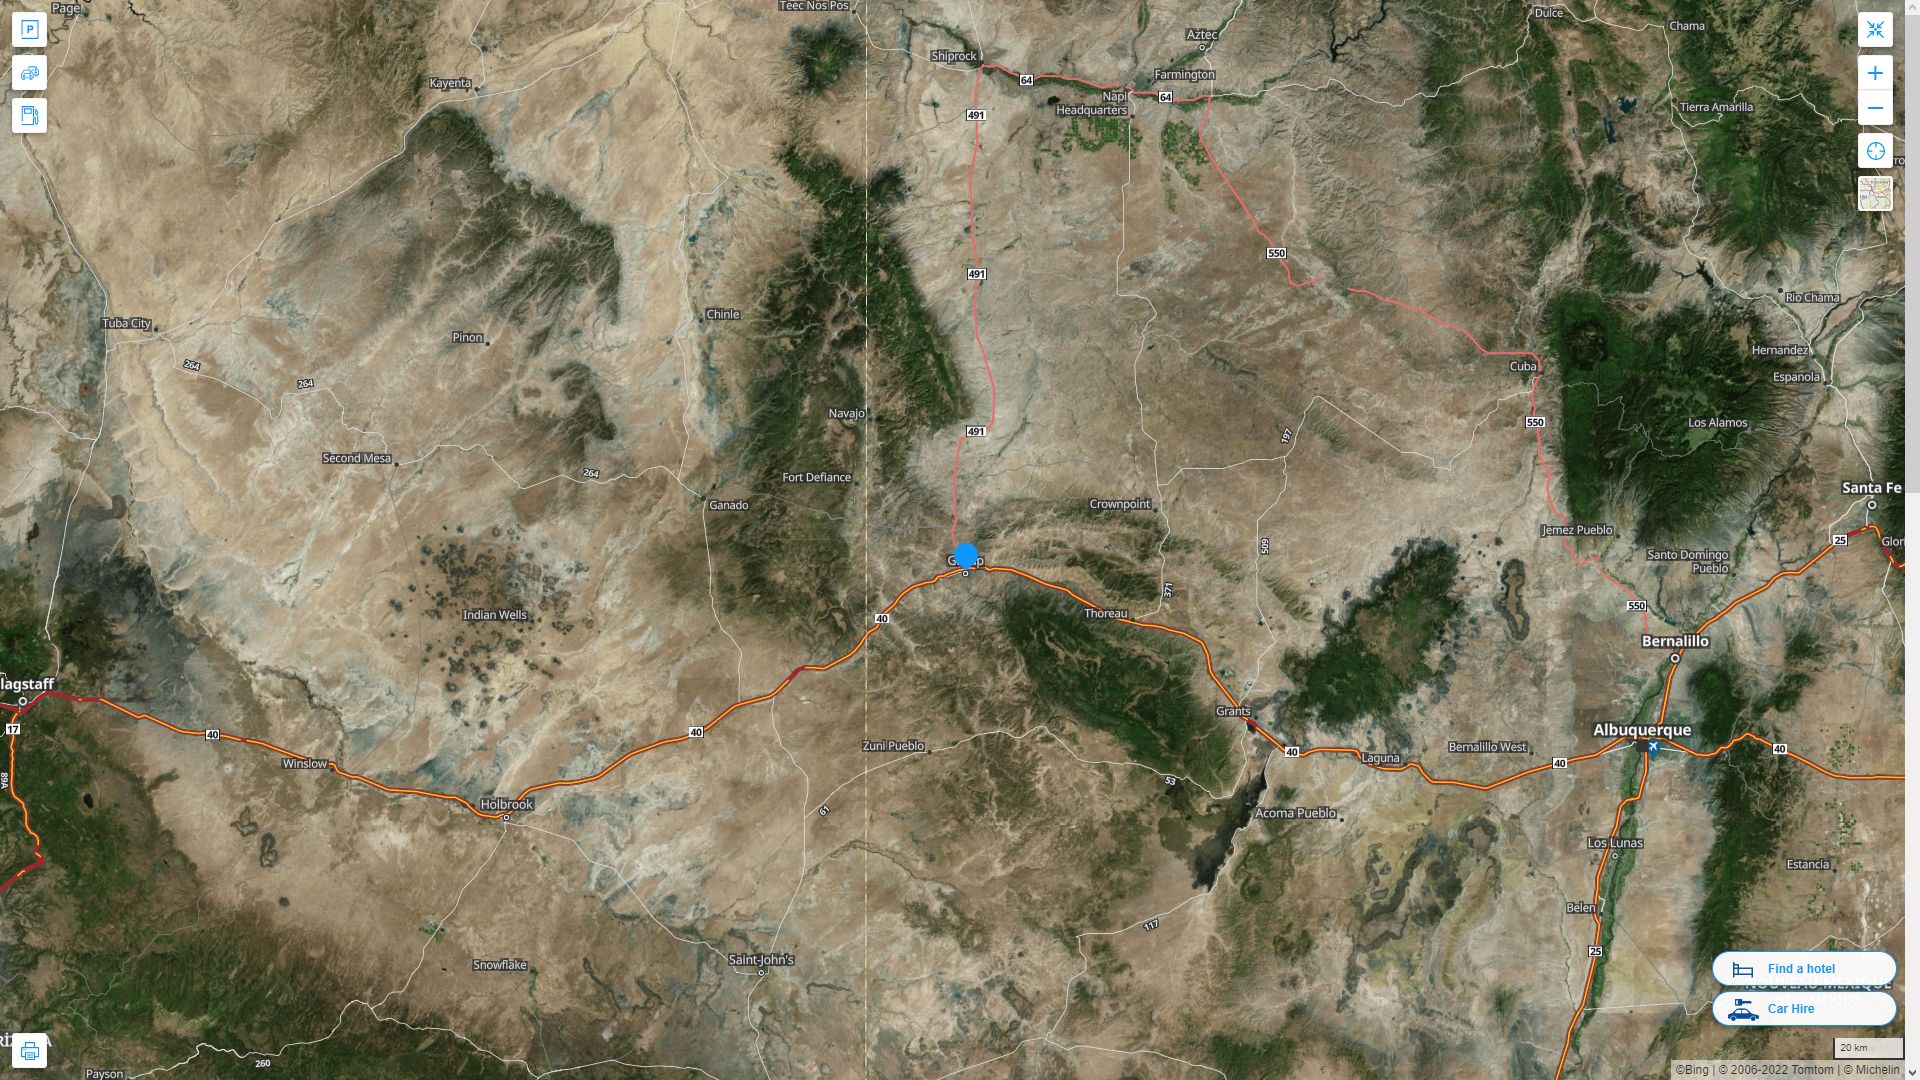 Gallup New Mexico Highway and Road Map with Satellite View